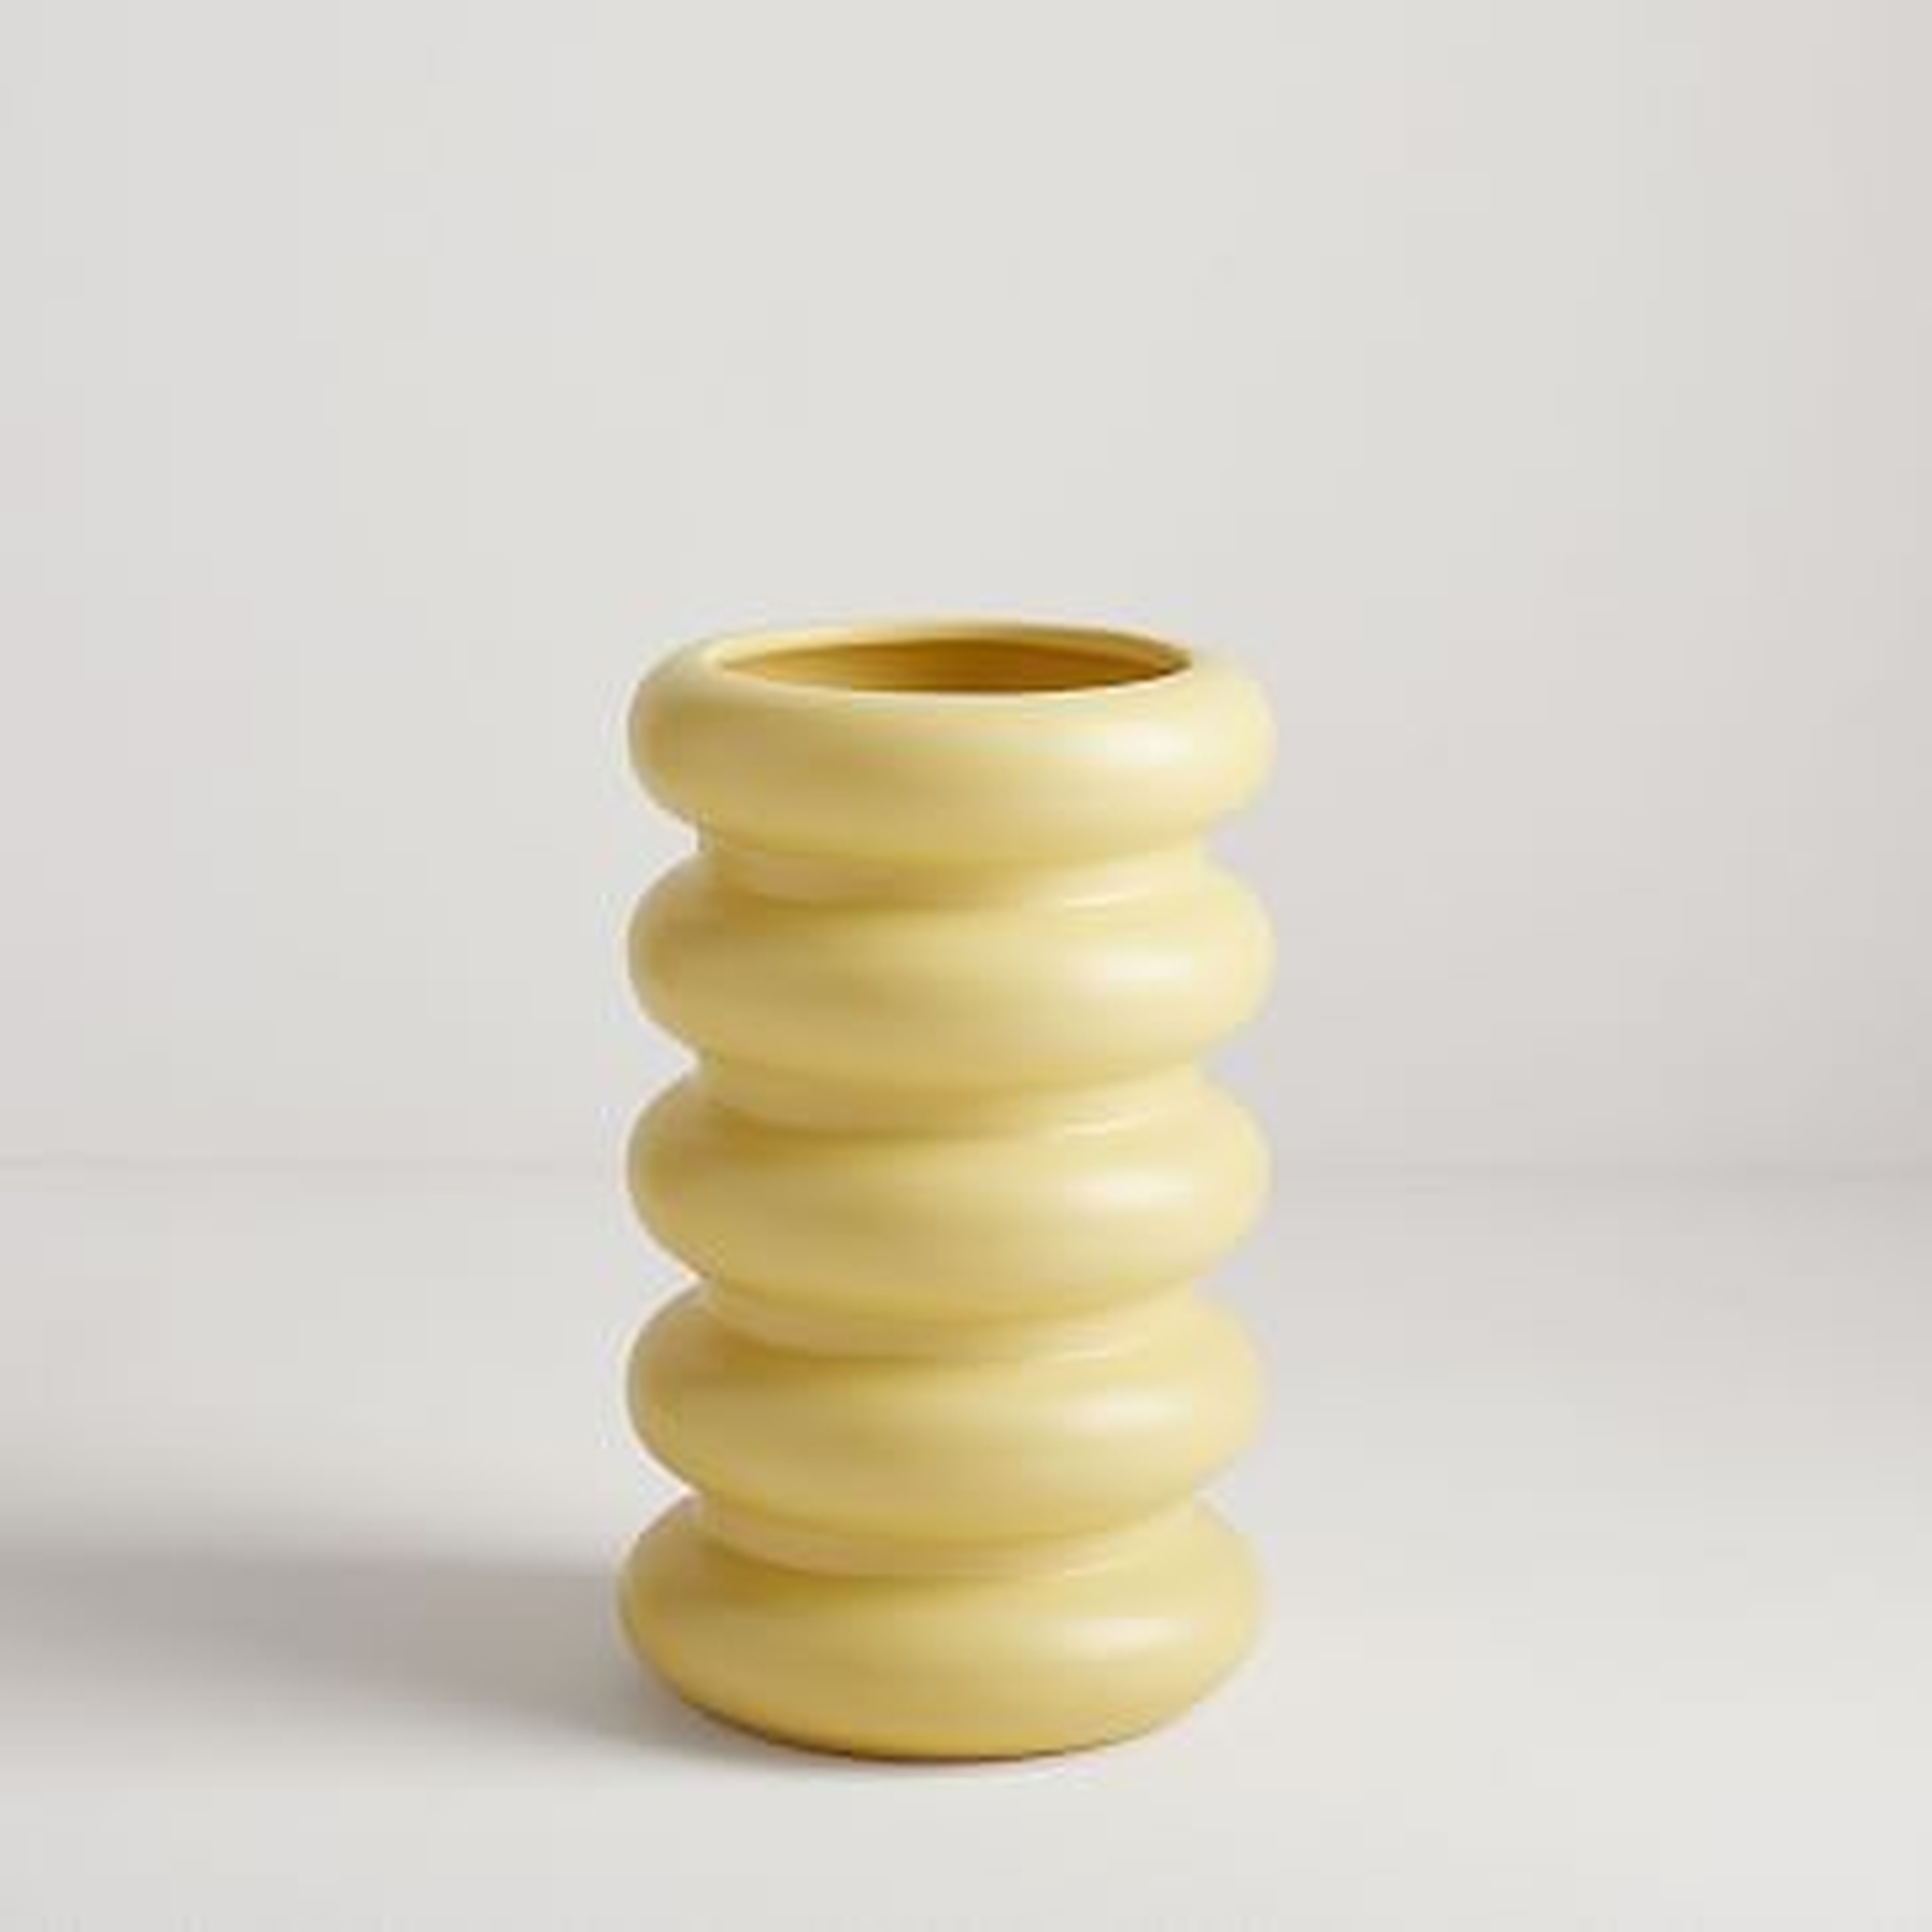 Stepped Form Ceramic Vase, Round Stacked, Yellow Stone - West Elm